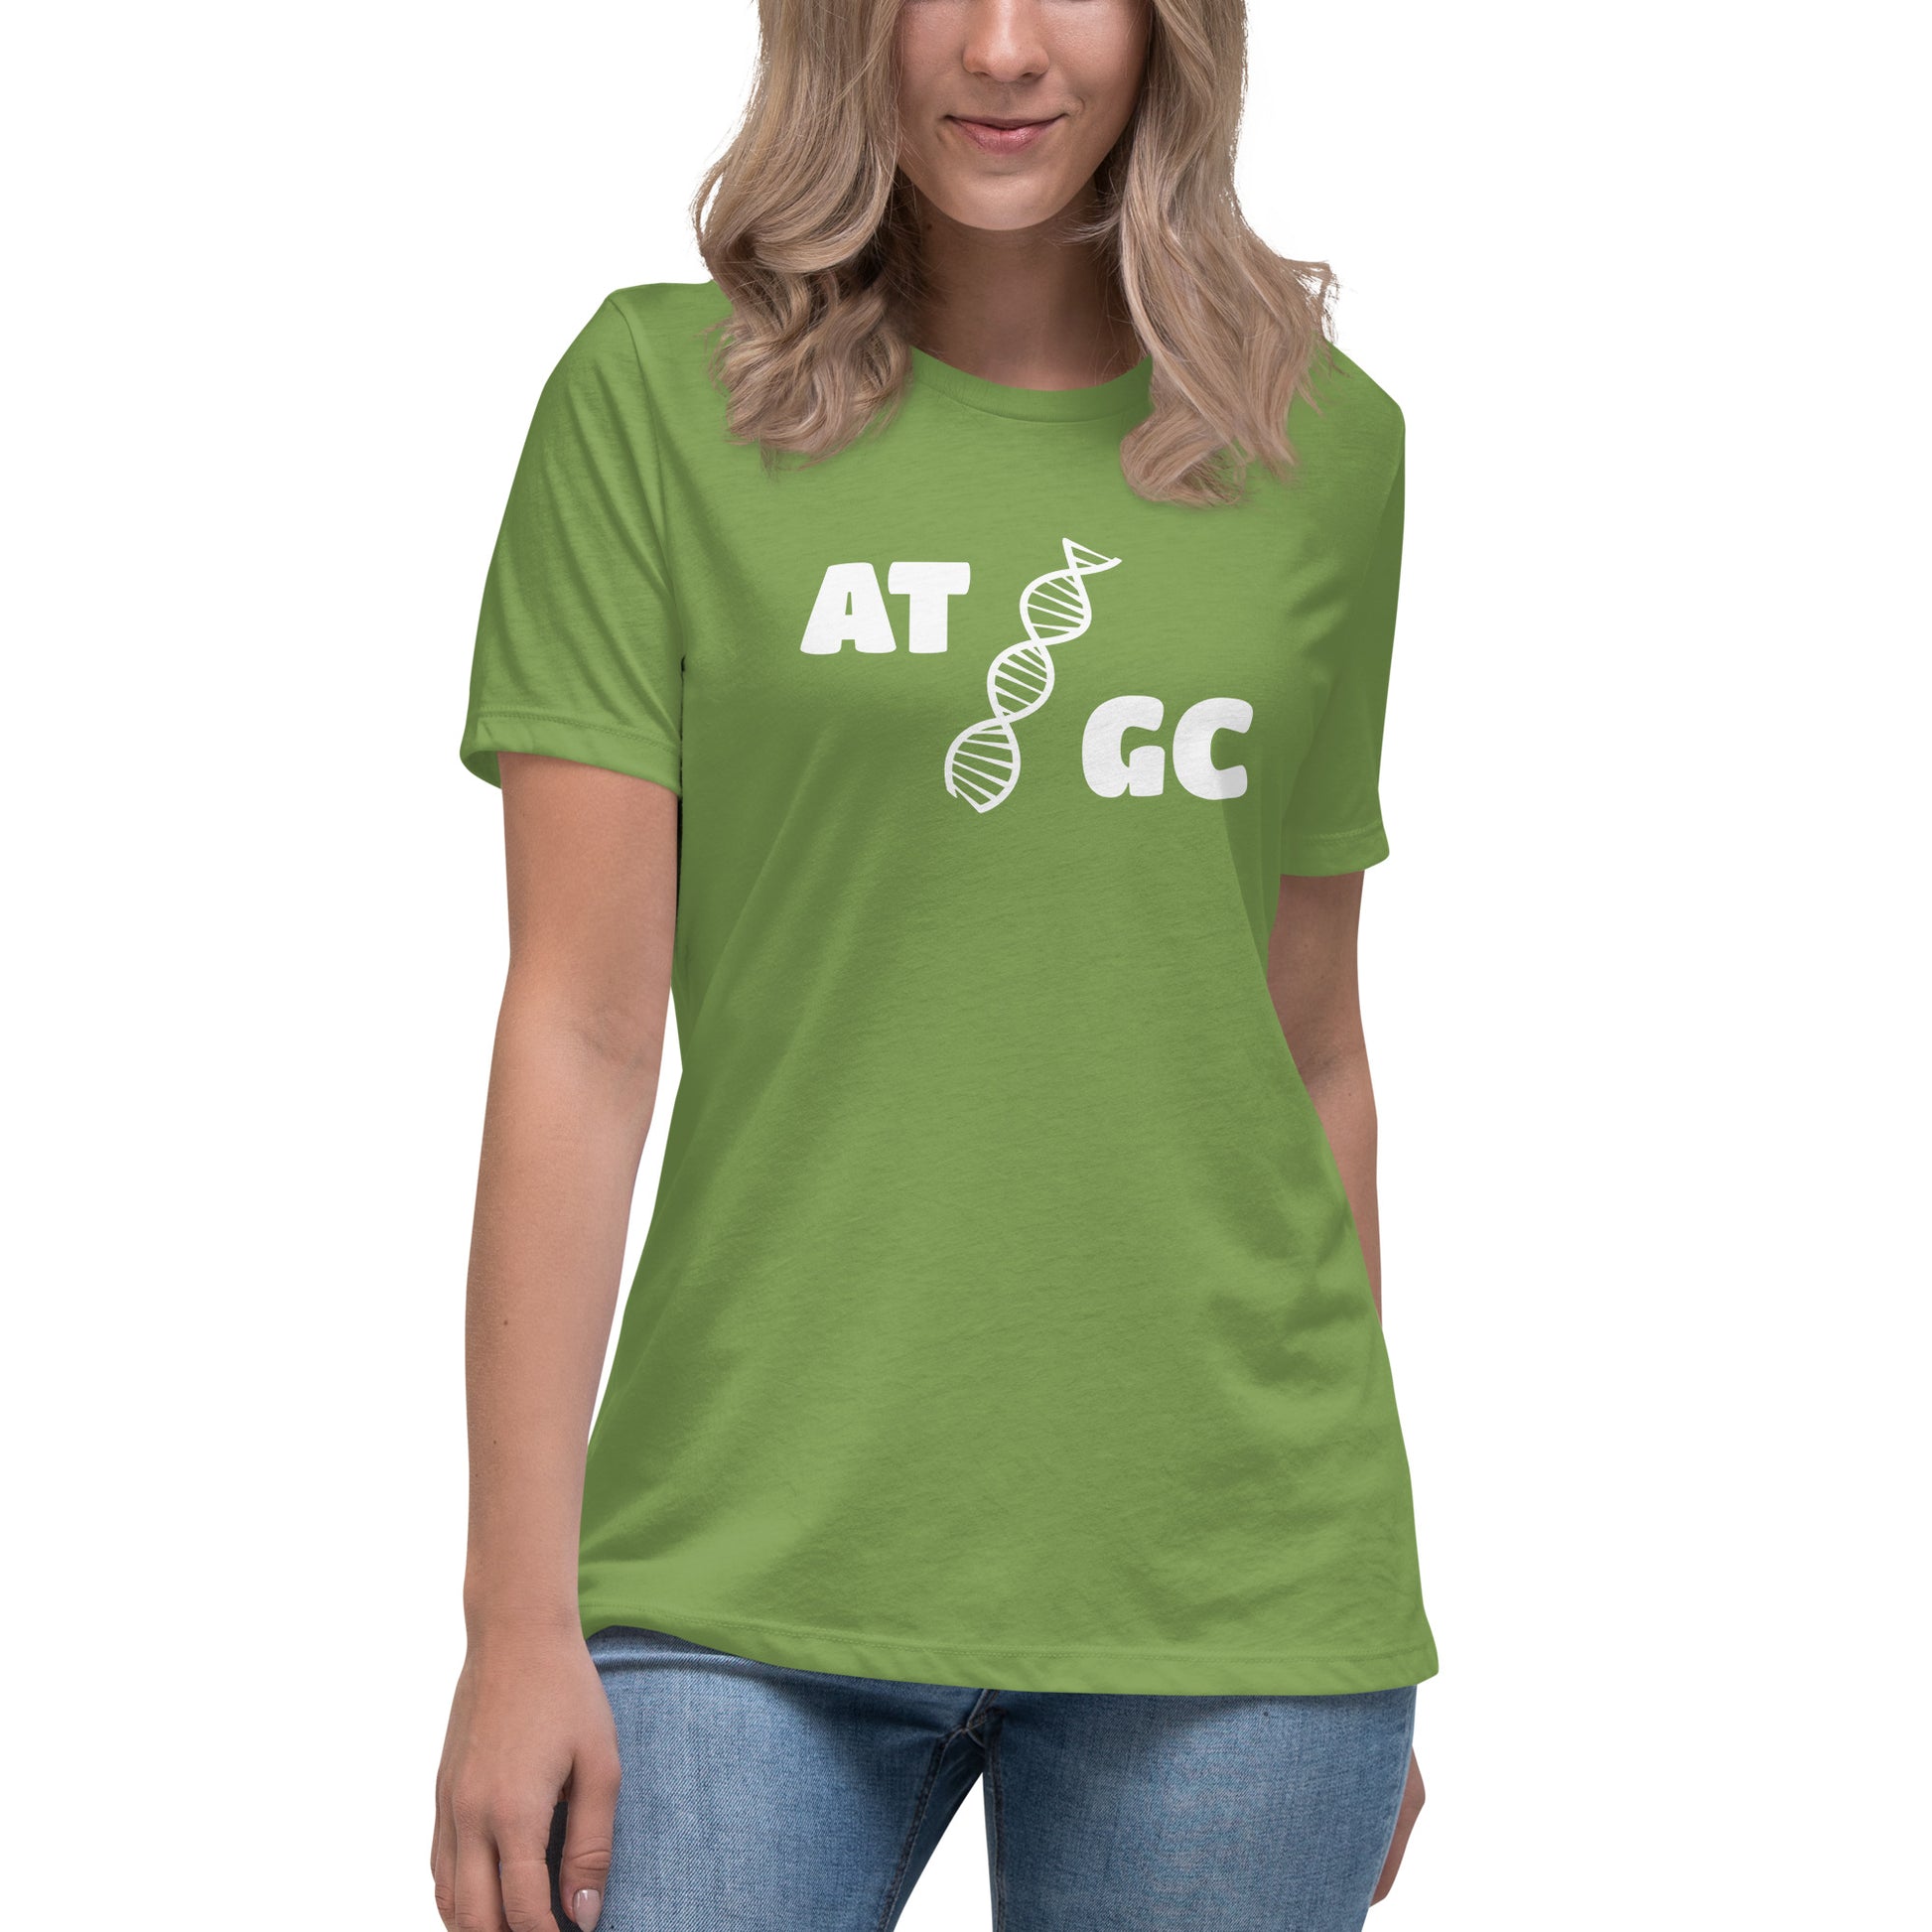 Women with leaf green t-shirt with image of a DNA string and the text "ATGC"